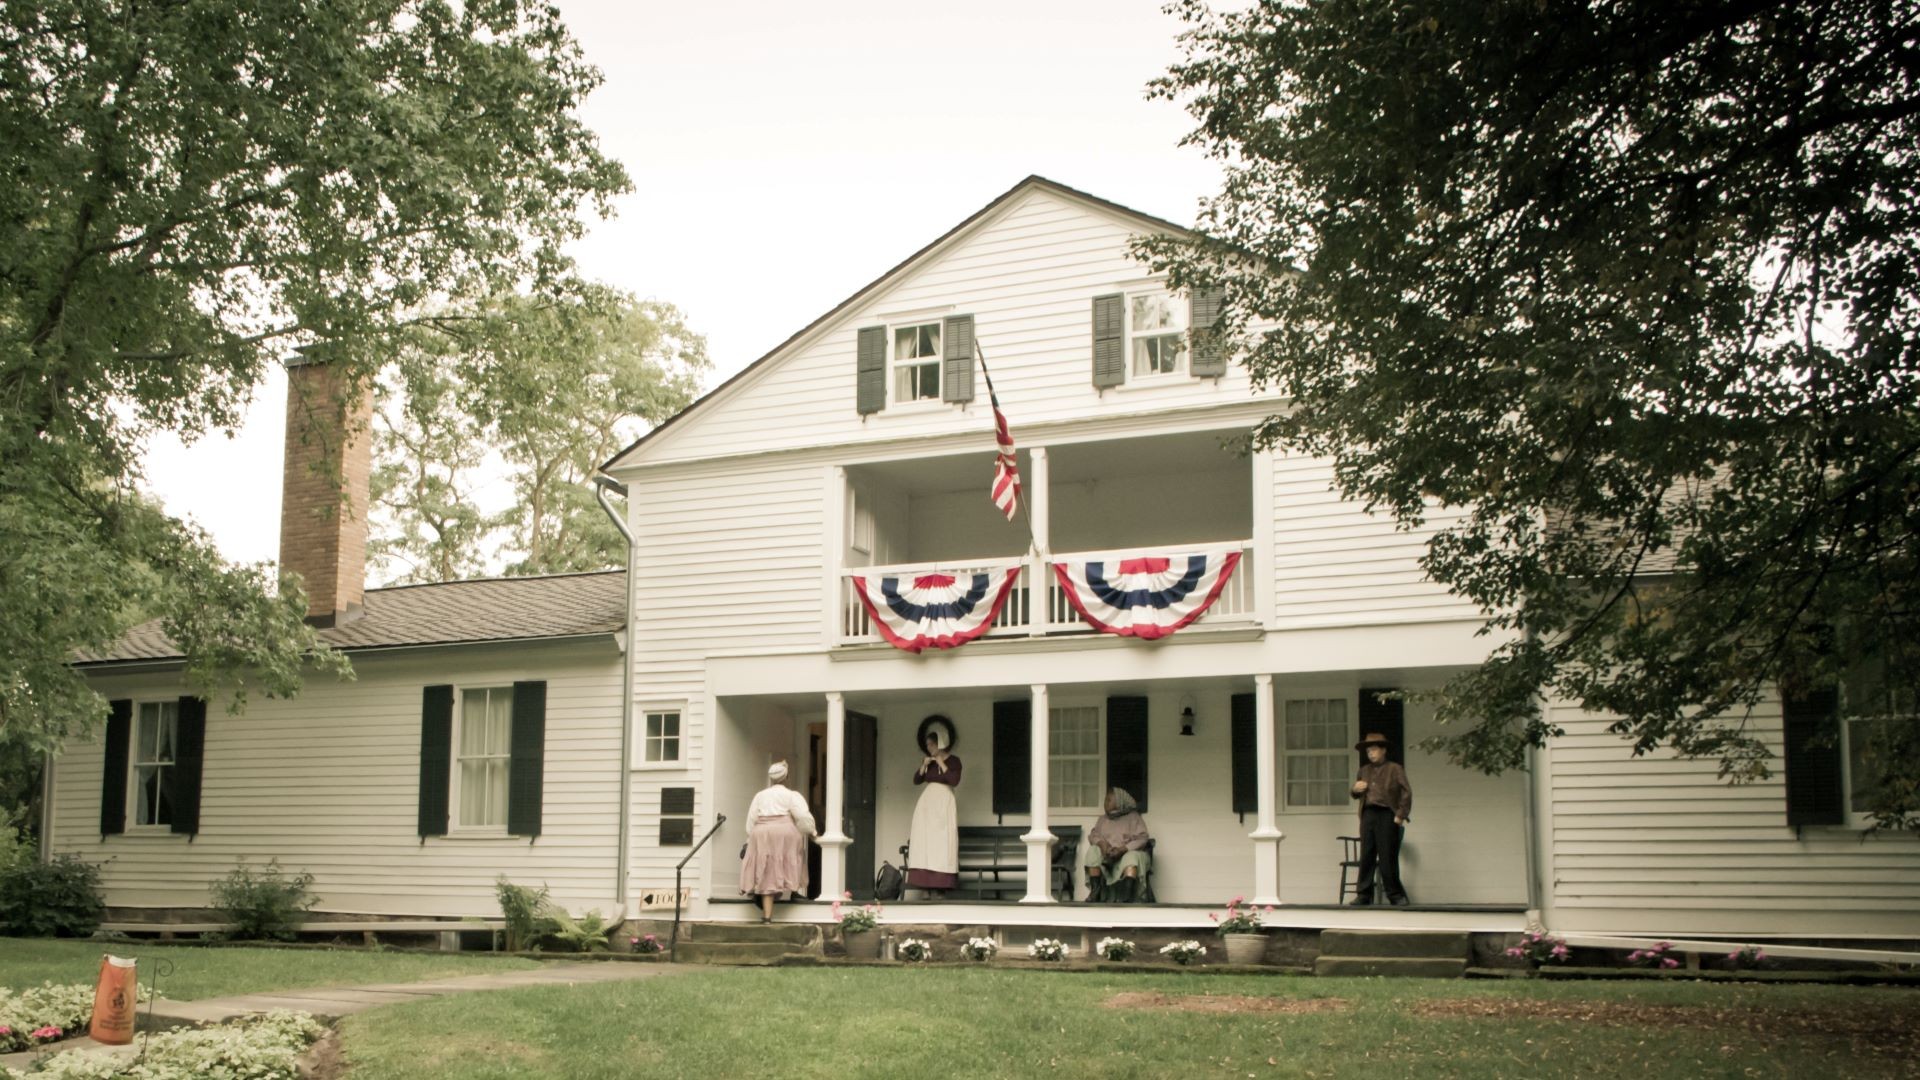 spring hill historic home tours